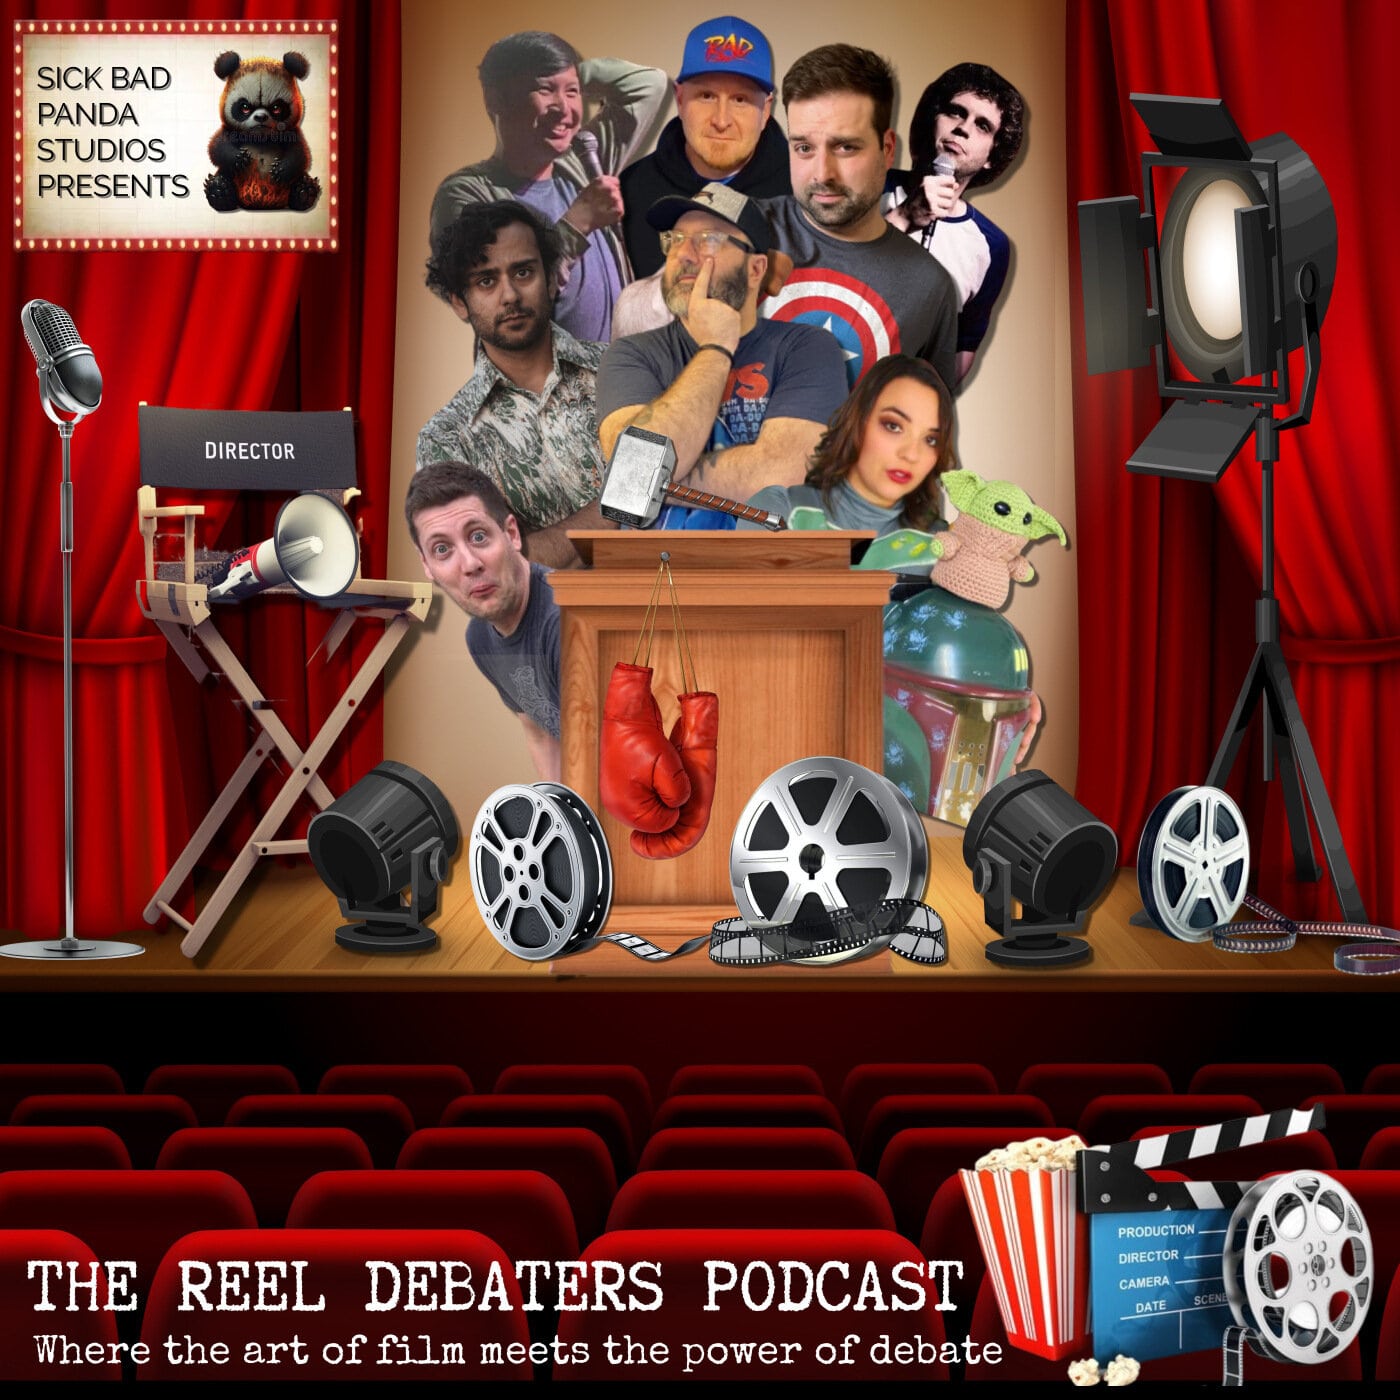 Artwork for The Reel Debaters Podcast